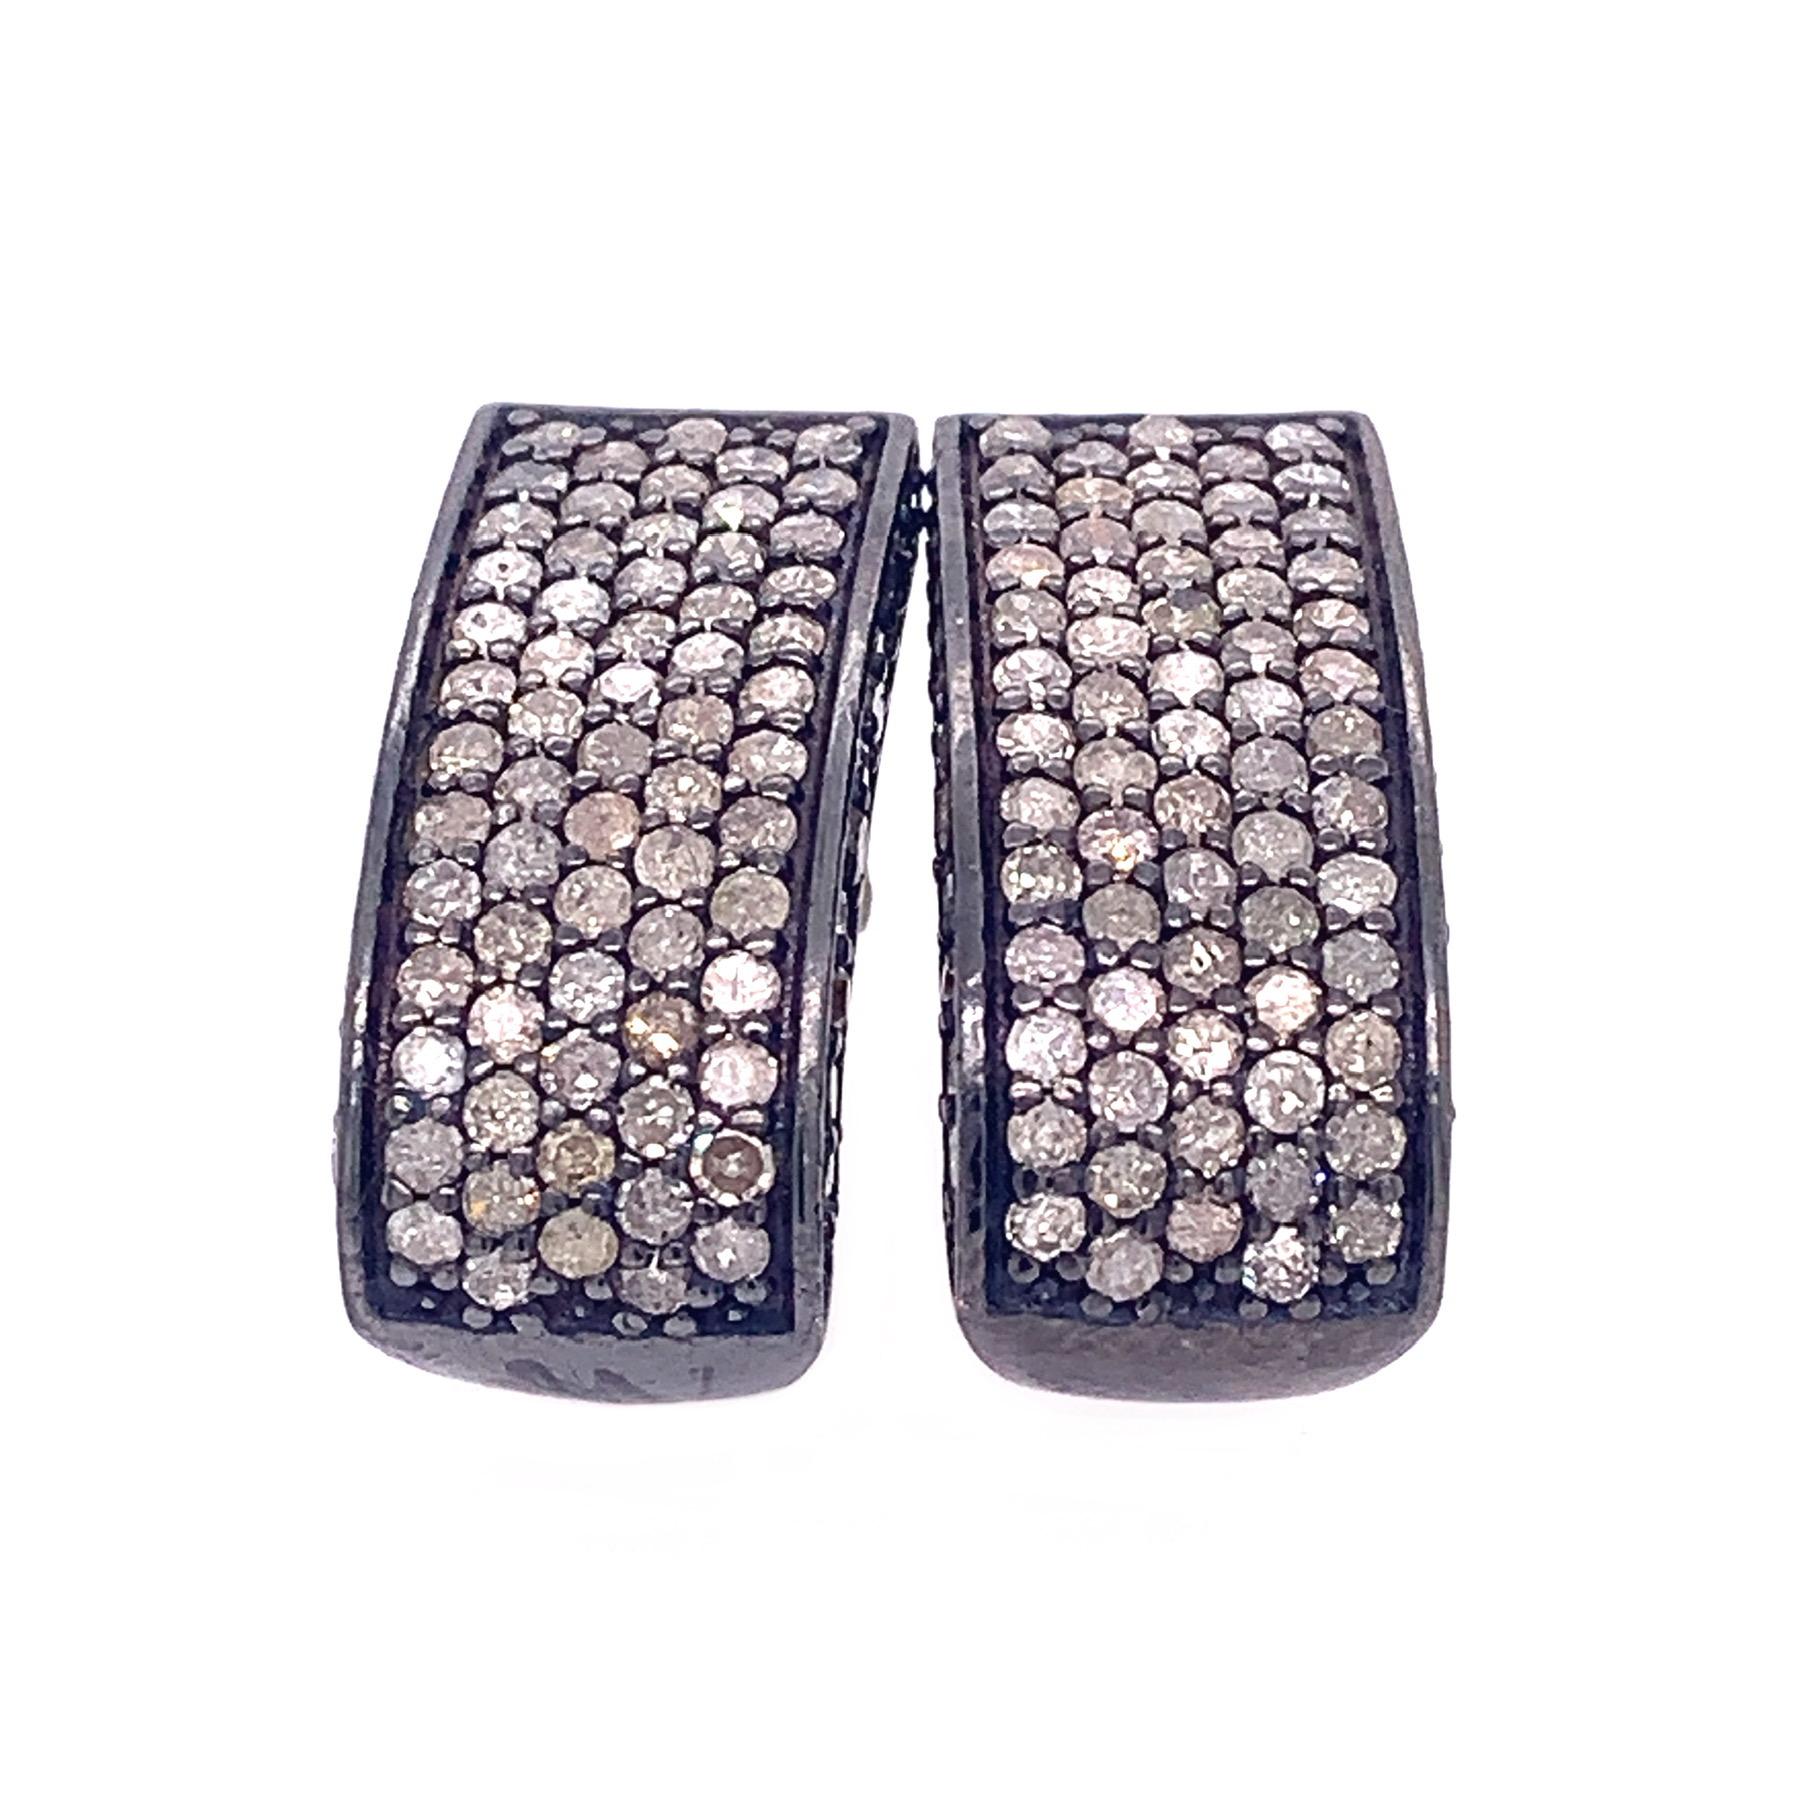 Contemporary Lucea New York Icy Diamond Earrings For Sale